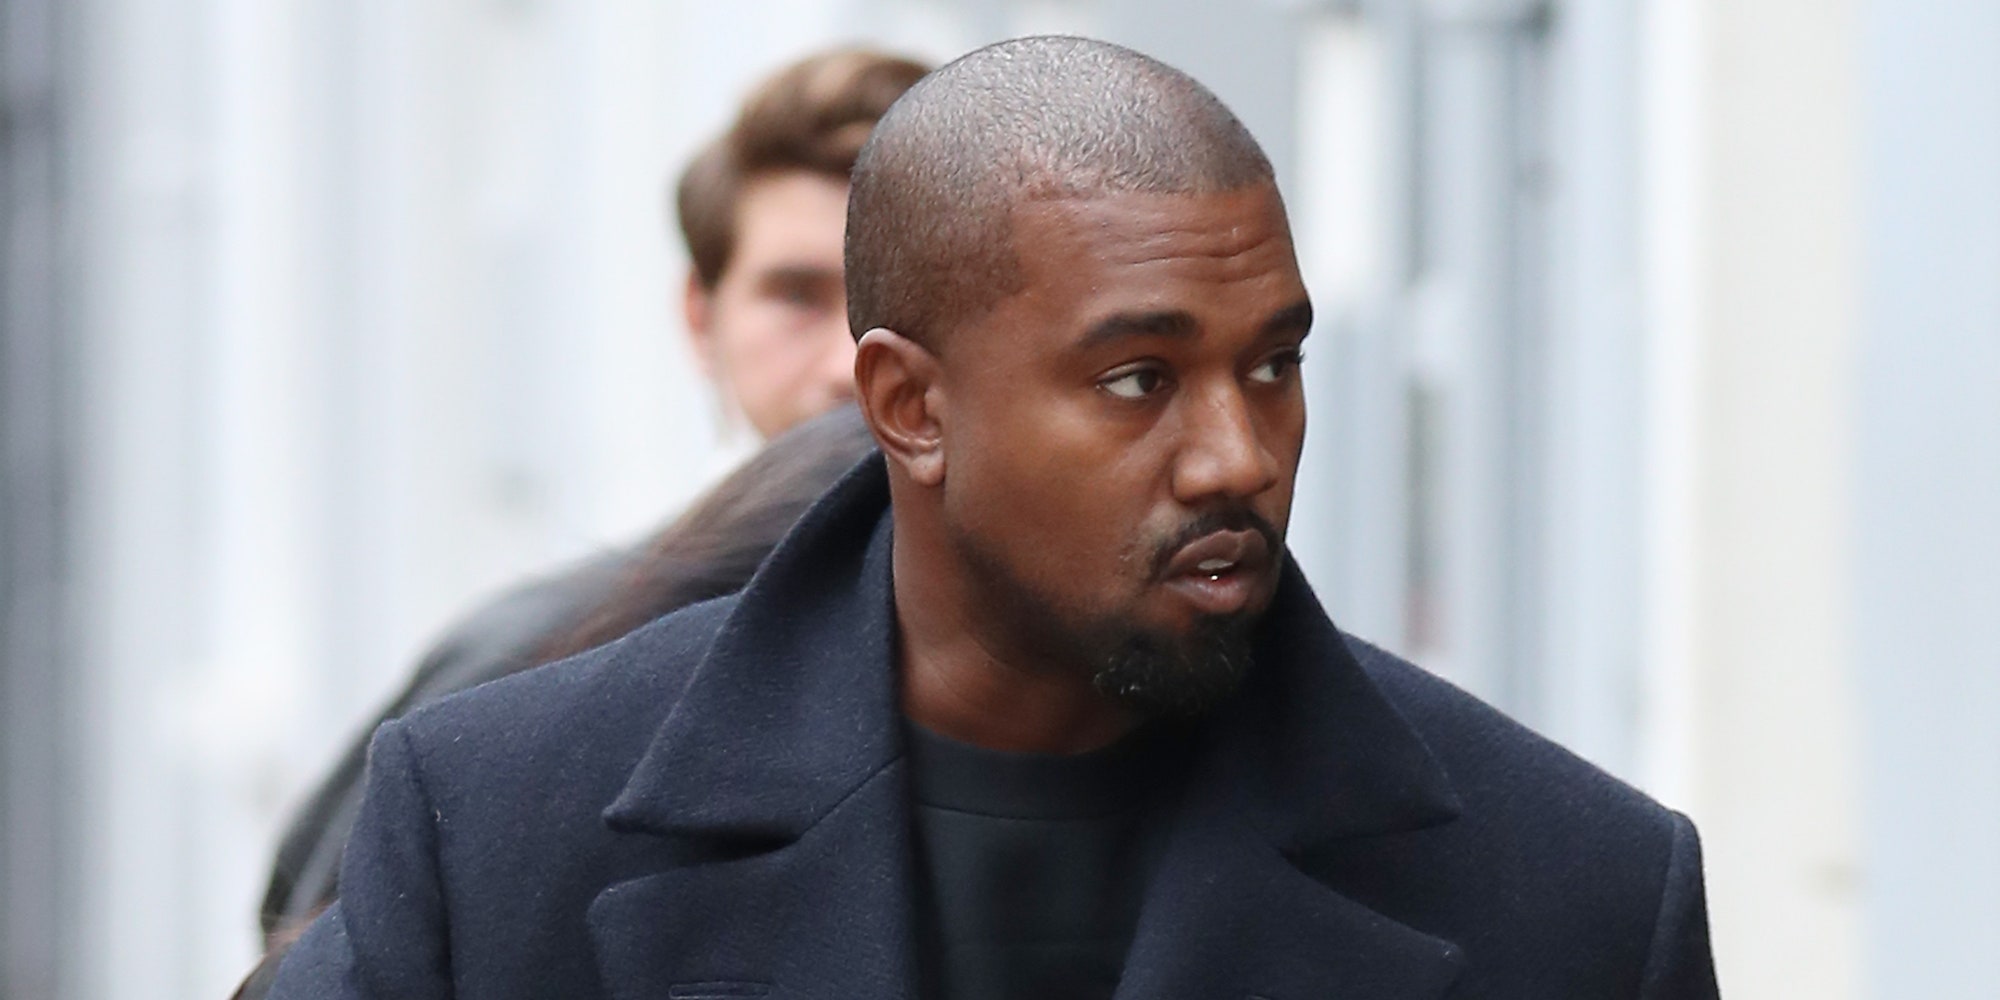 Kanye West’s album ‘Donda’ released after two years